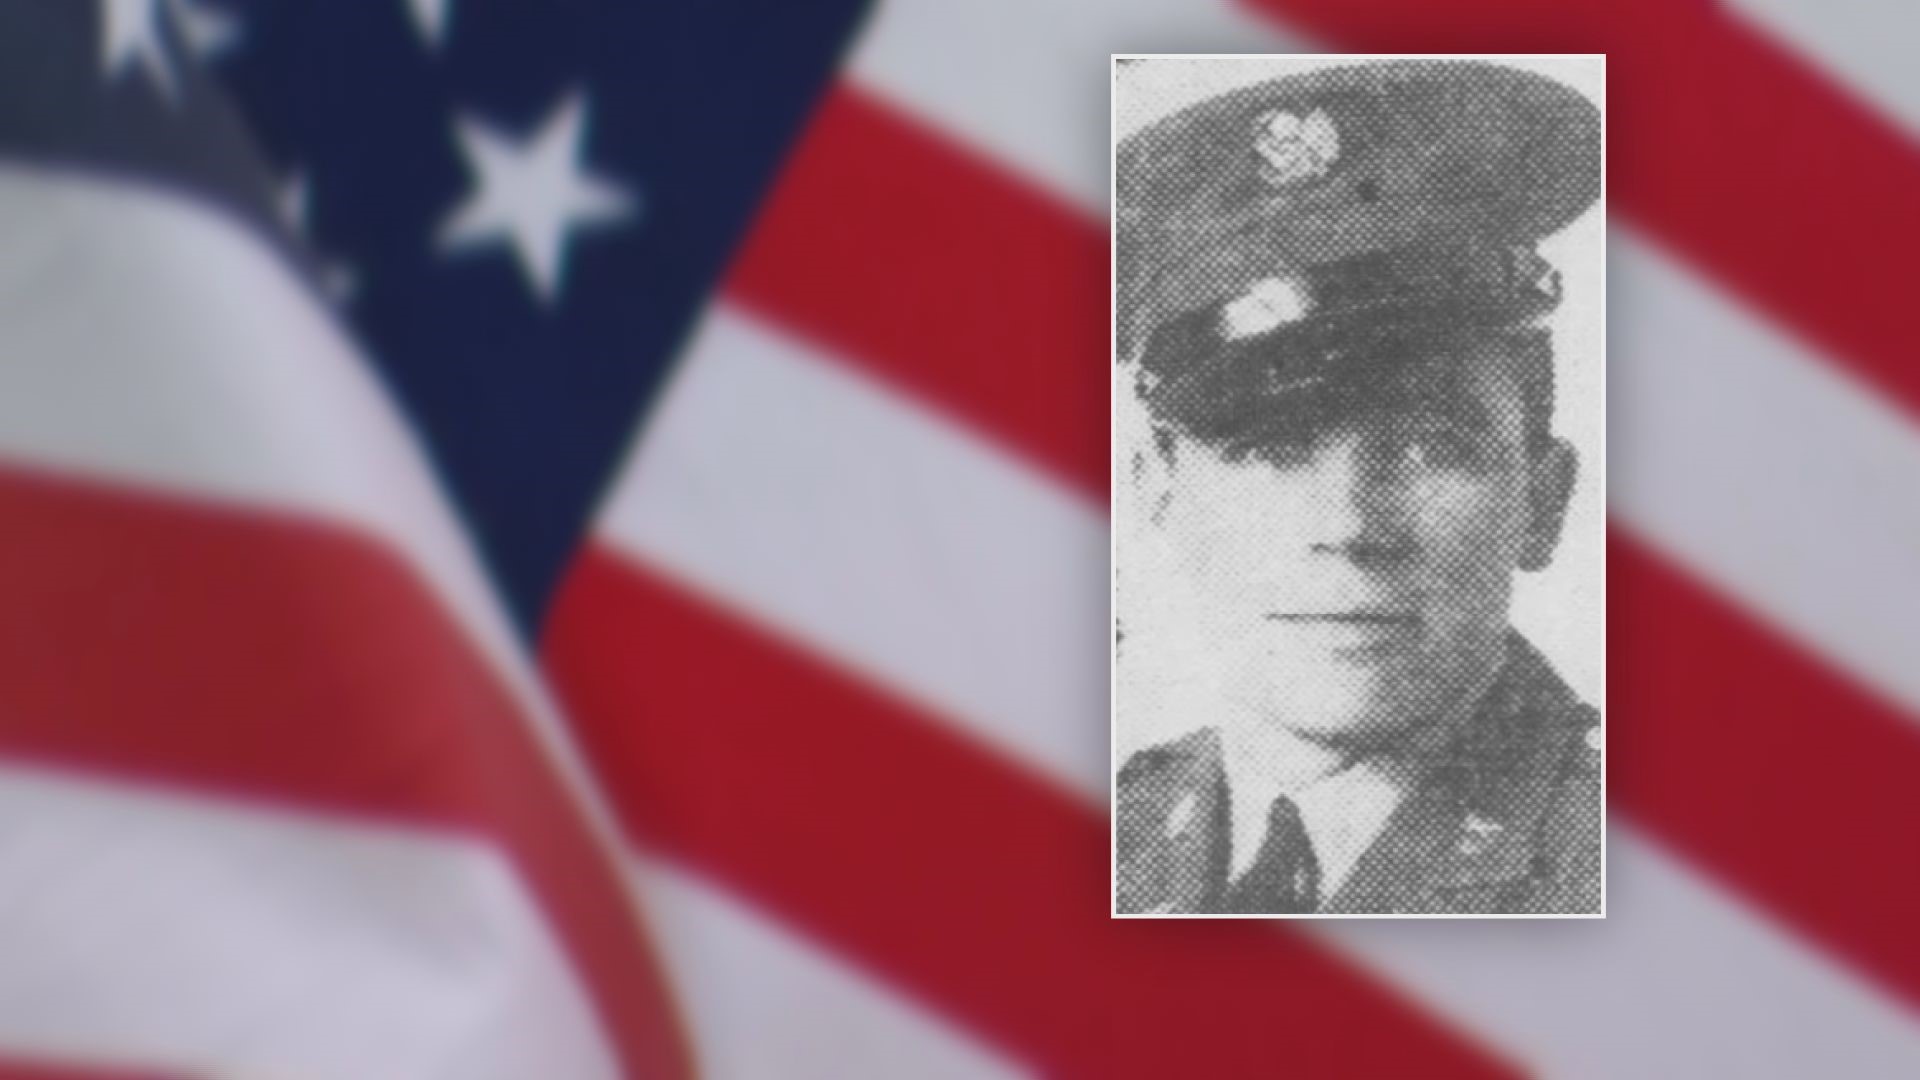 The remains of a World War II soldier from Grand Rapids are back home nearly a century after he was killed in action.